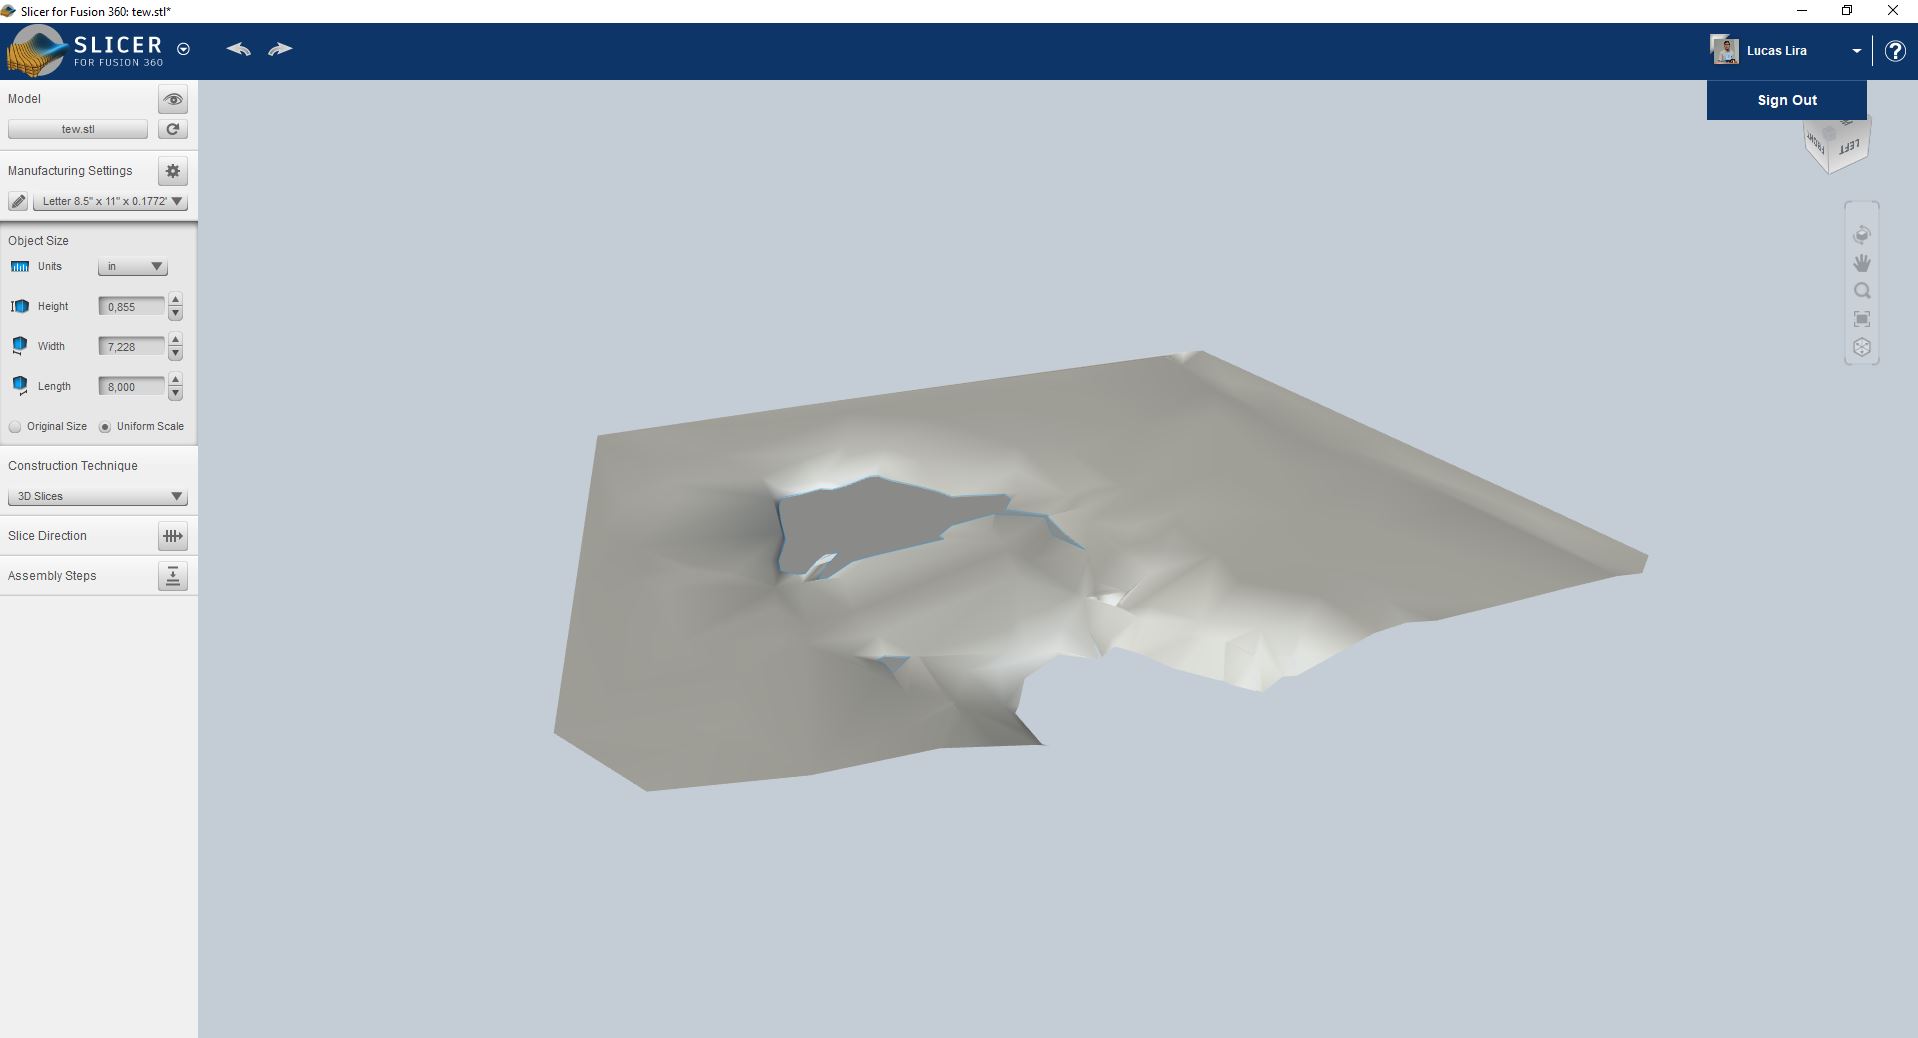 Slicer for Fusion 360 was unable to process this model. - Autodesk